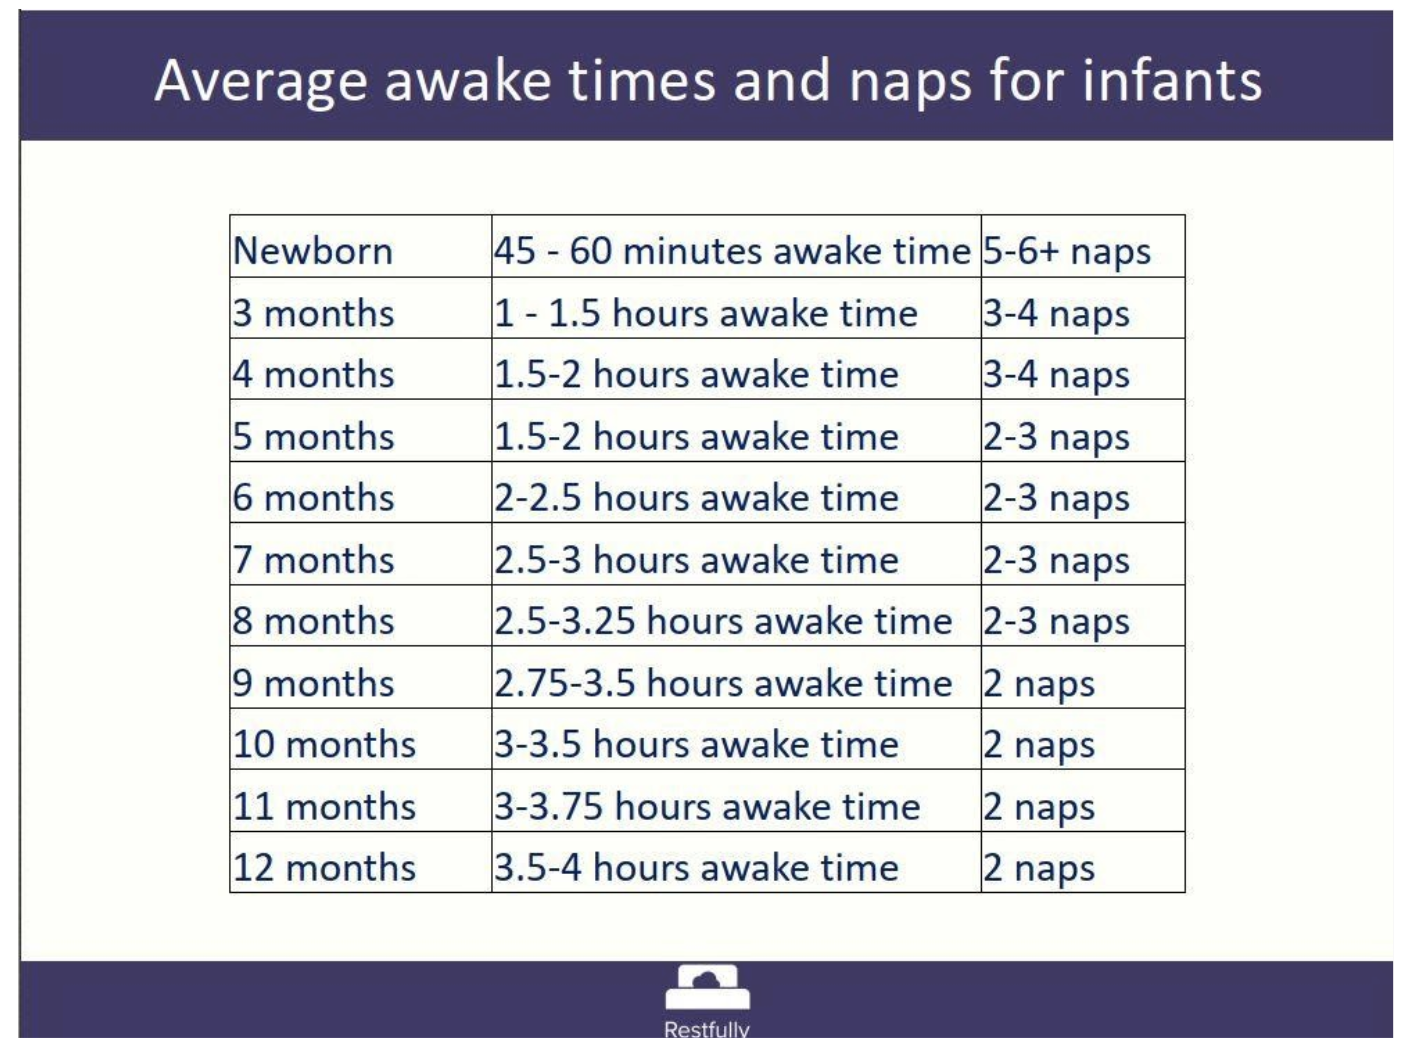 average wake times and nap times for infants